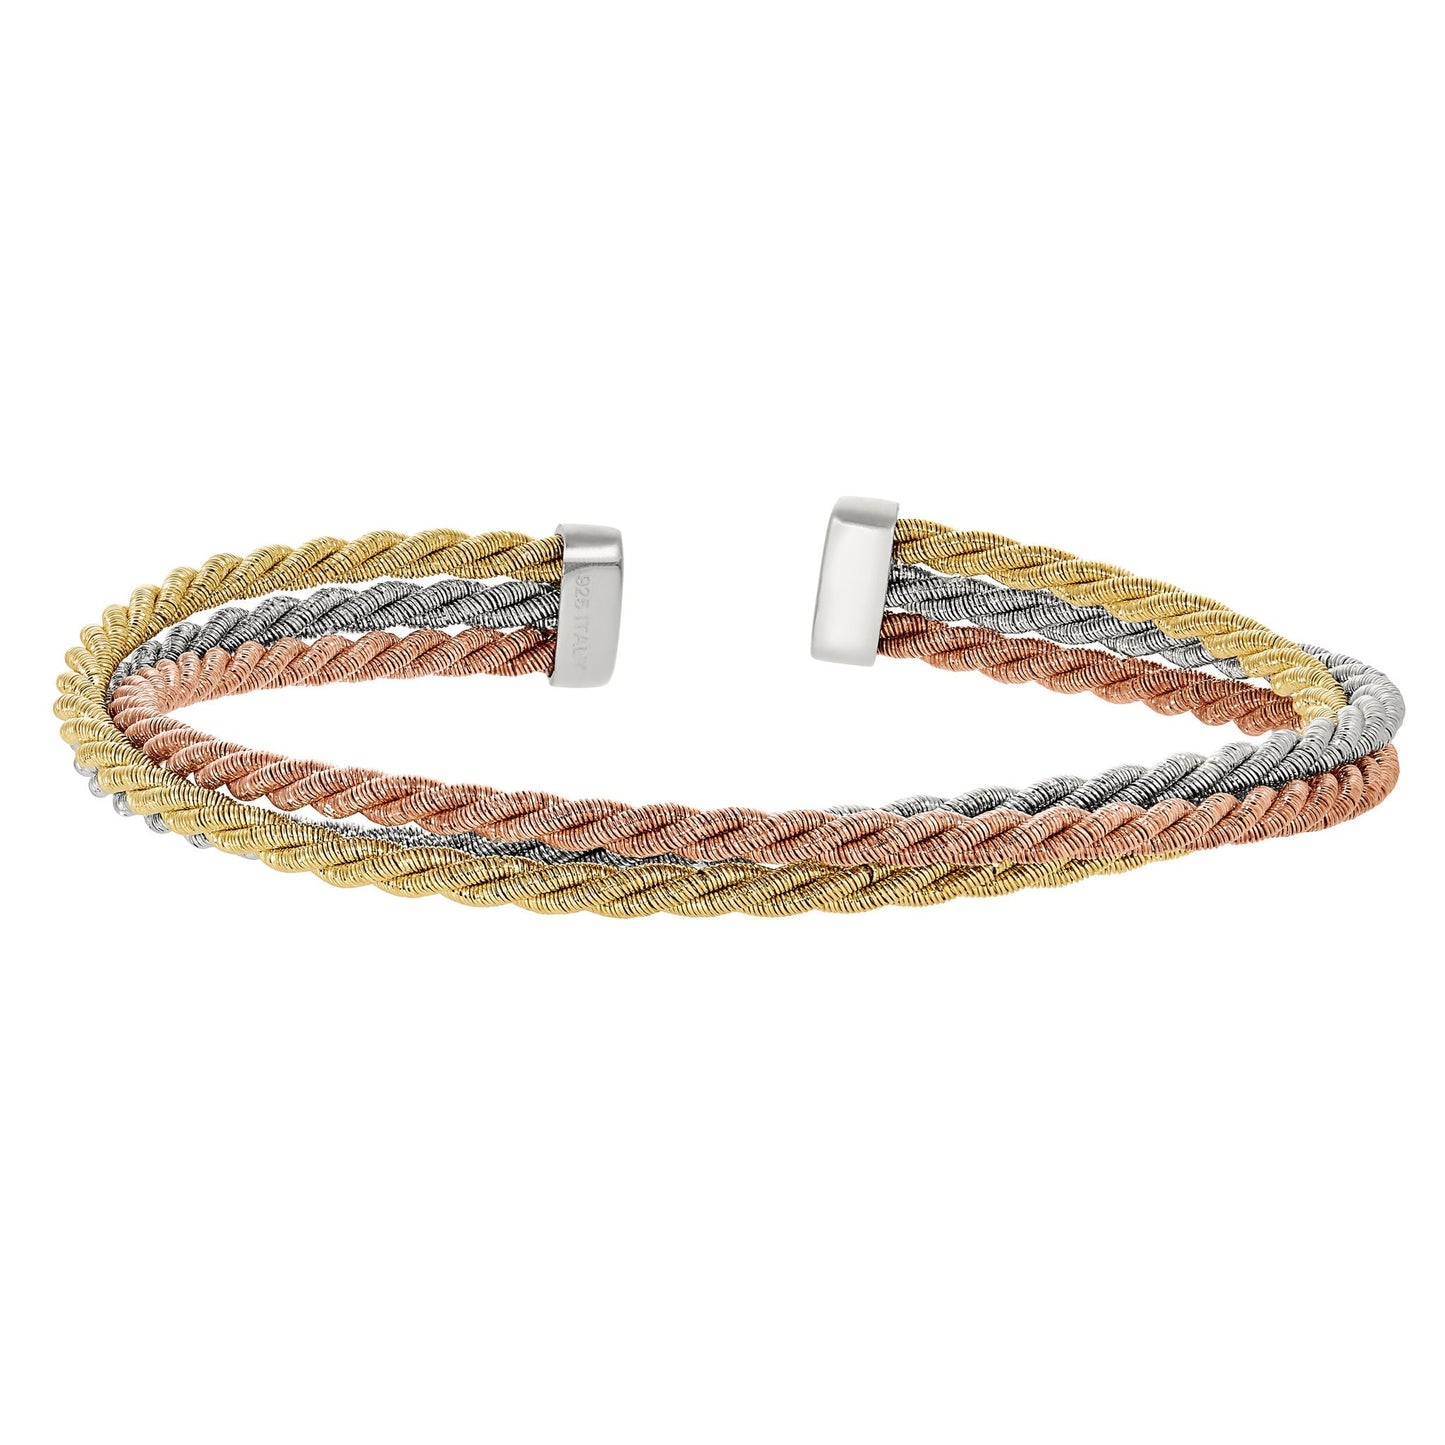 A triple rope rose yellow & white gold twist bracelet displayed on a neutral white background.